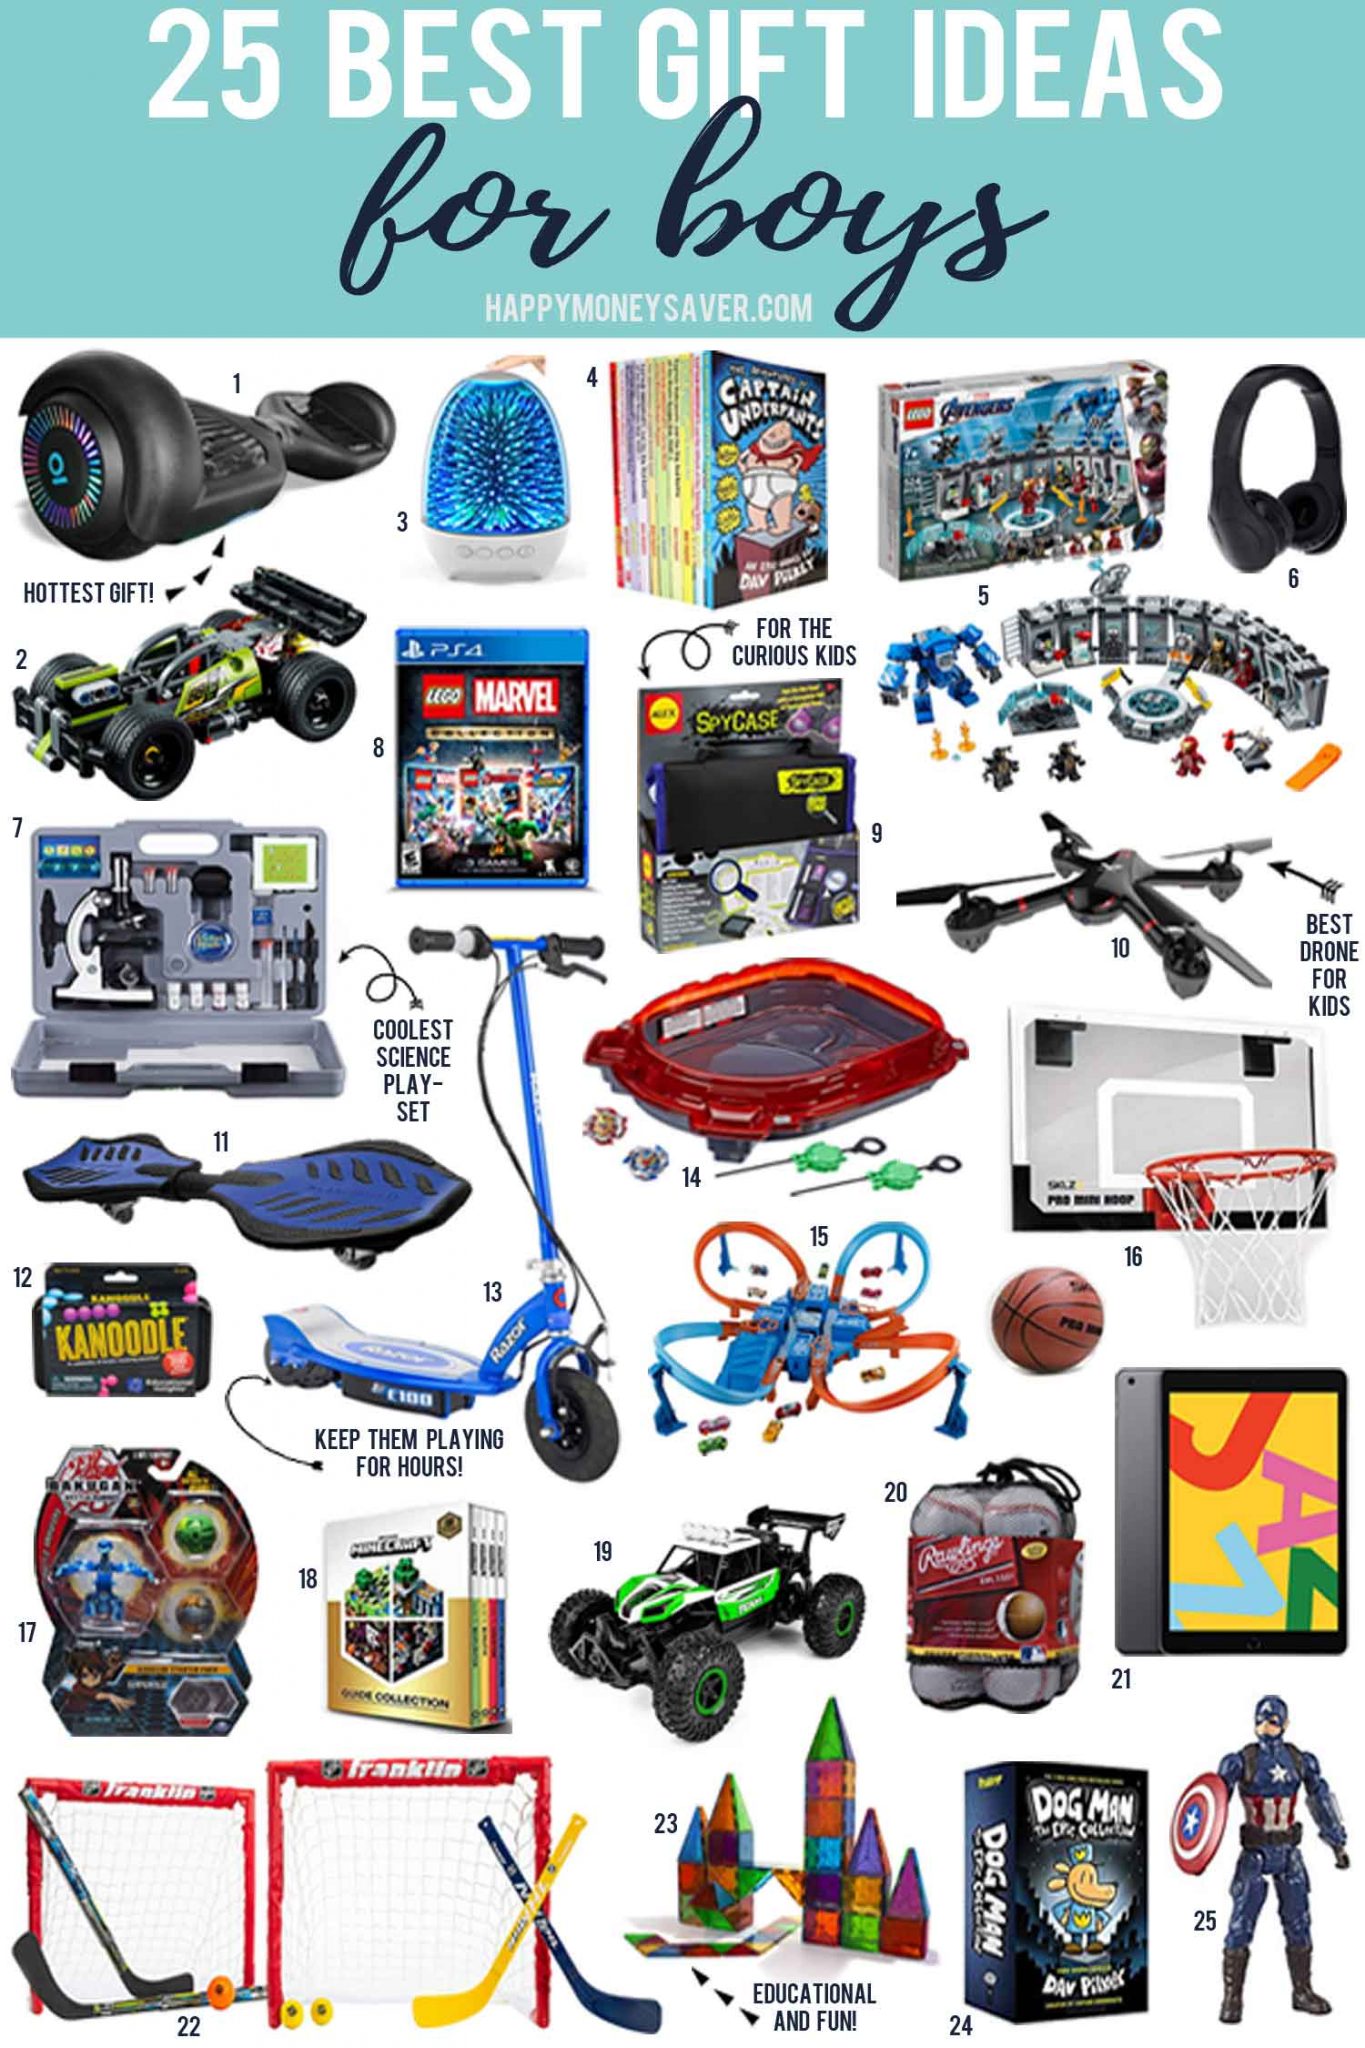 25 Best Gifts for Boys in 2021 - Happy Money Saver